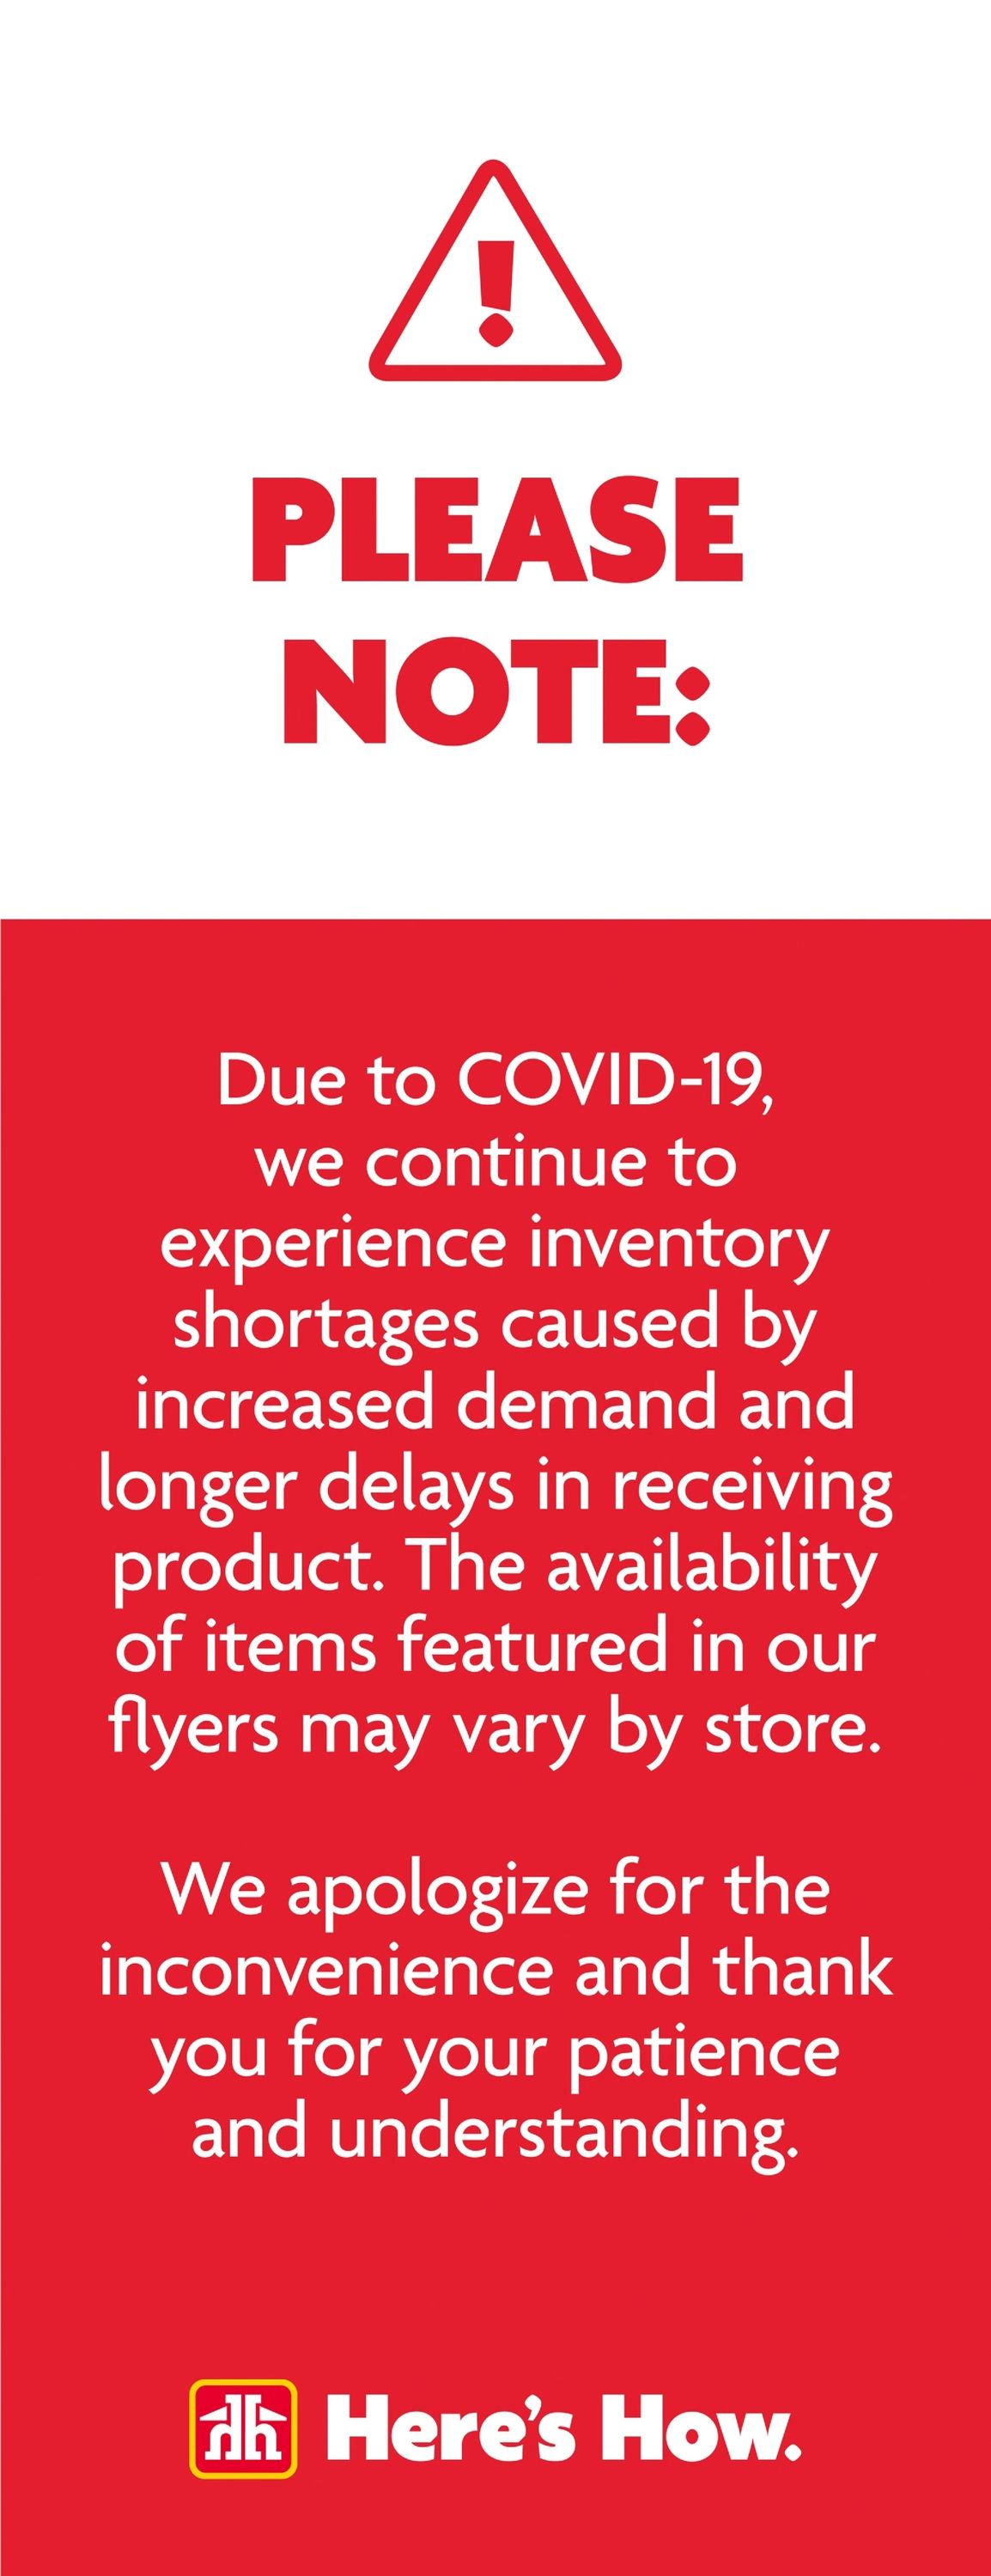 Home Hardware Flyer from 02/10/2022